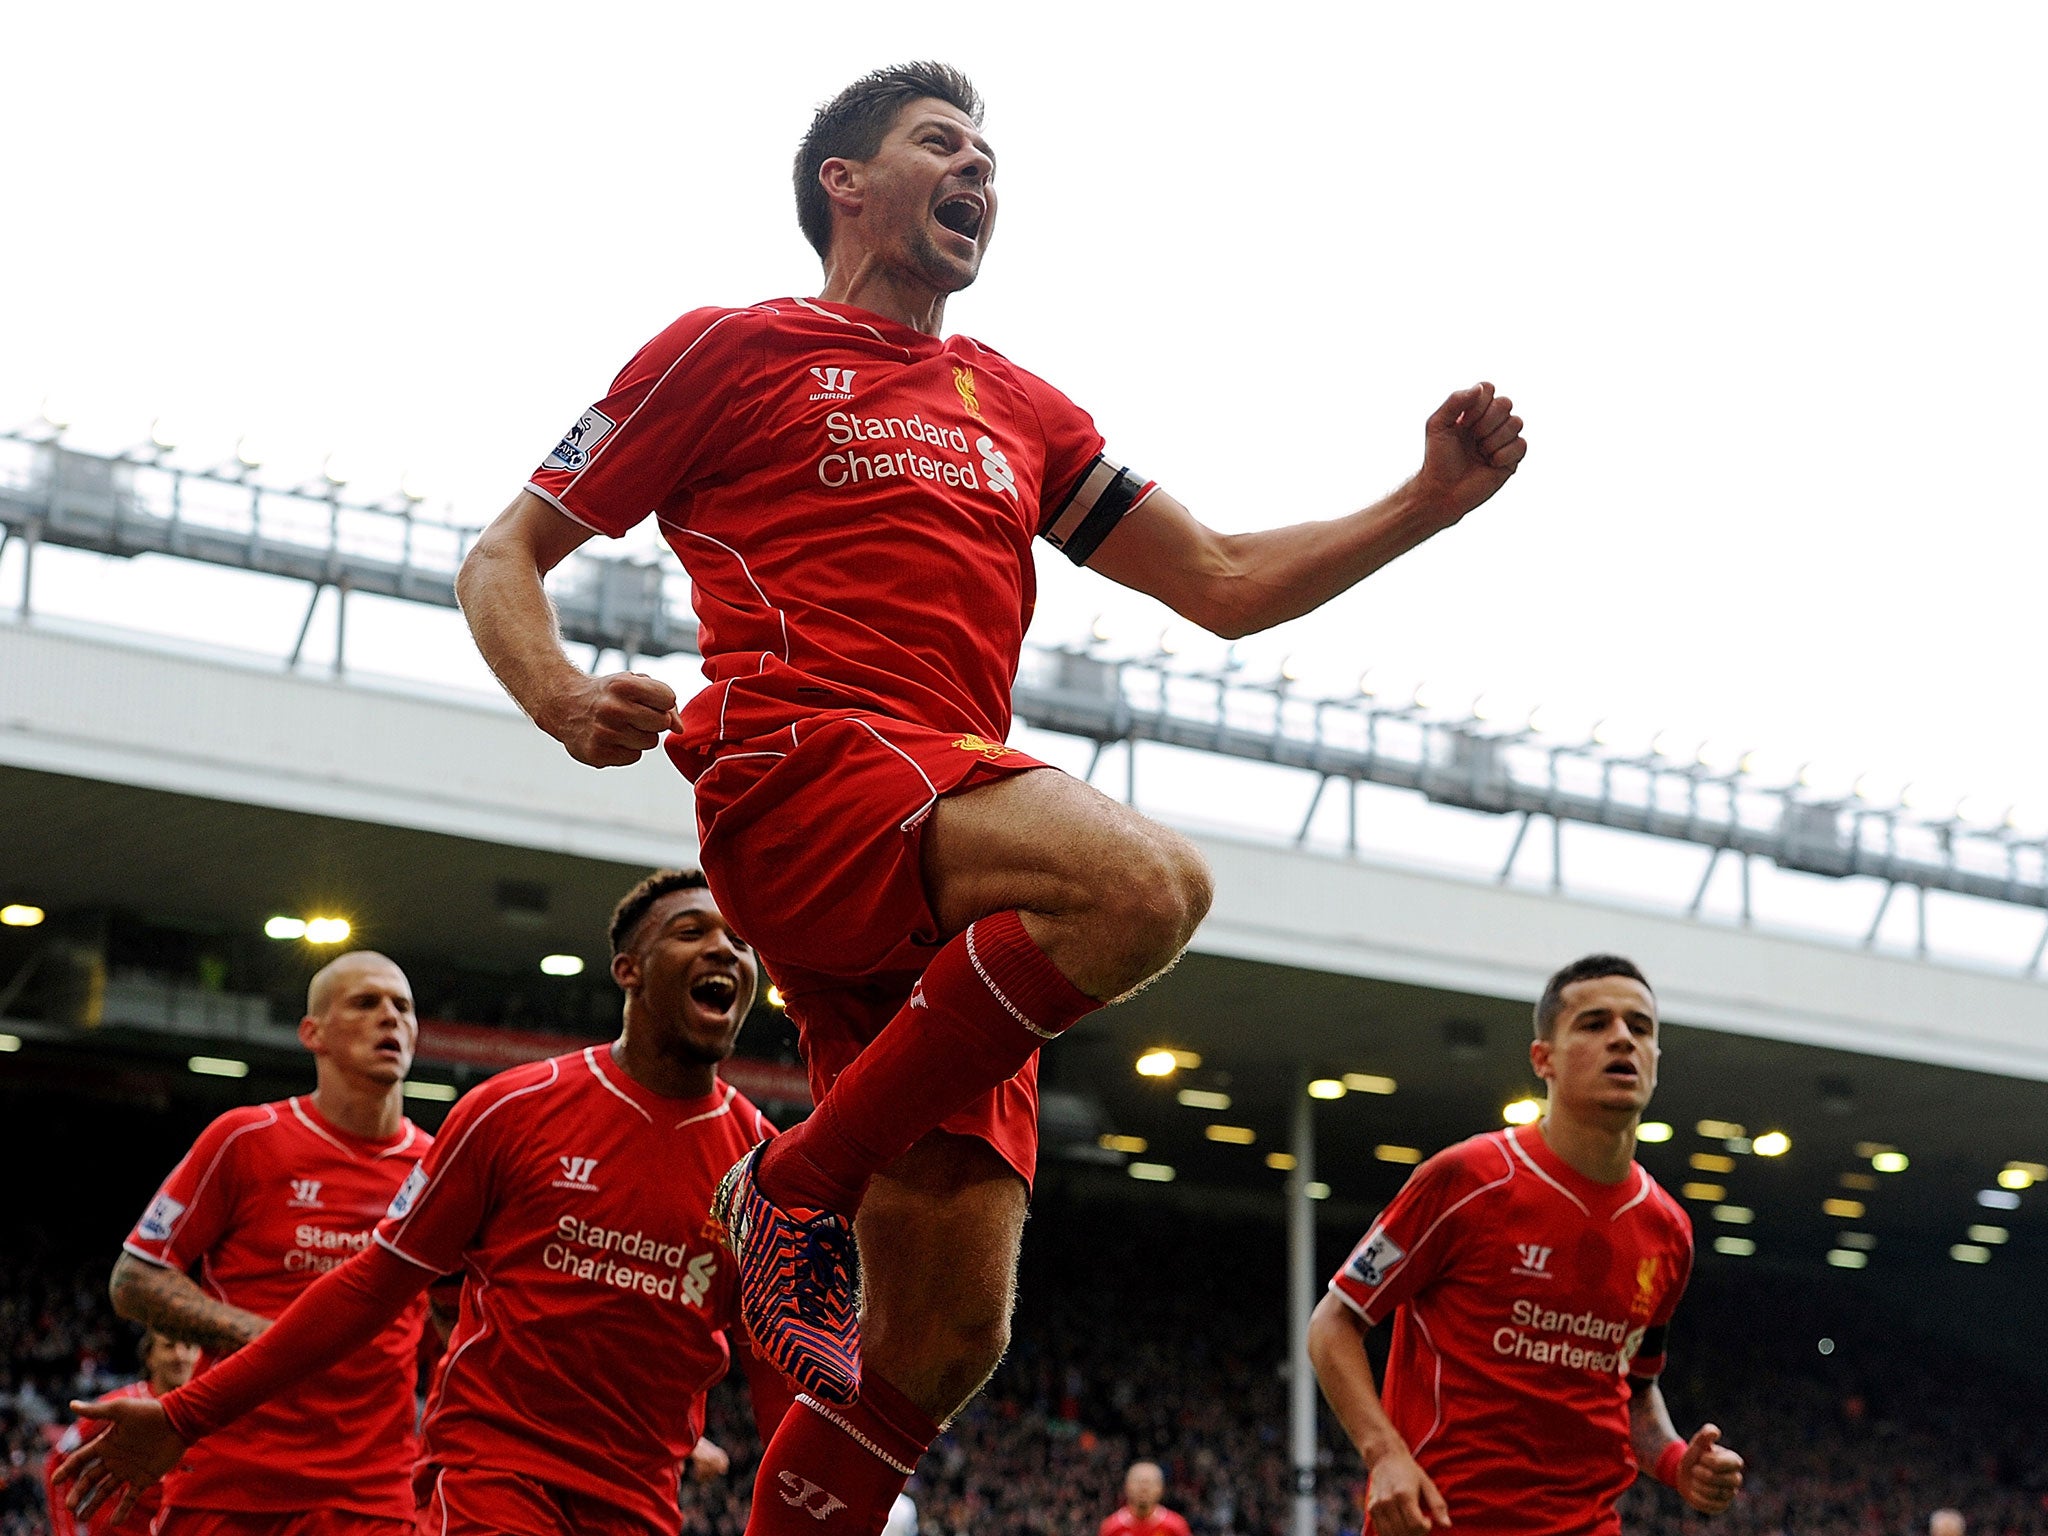 Steven Gerrard celebrates his goal against QPR at Anfield on 2 May